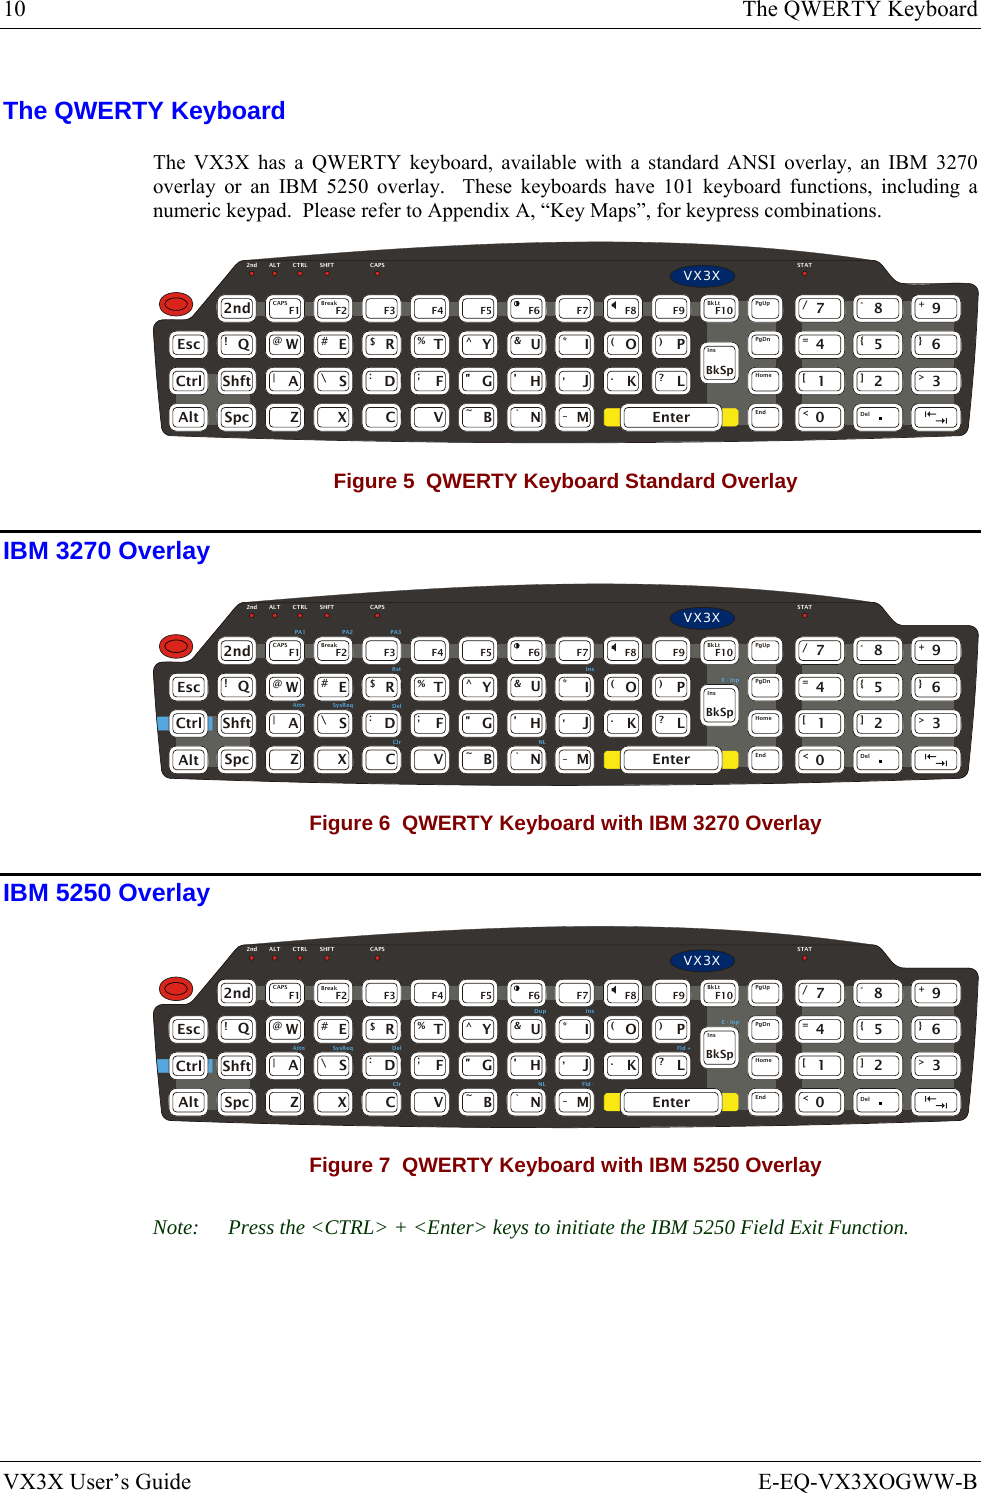 10  The QWERTY Keyboard VX3X User’s Guide  E-EQ-VX3XOGWW-B The QWERTY Keyboard The VX3X has a QWERTY keyboard, available with a standard ANSI overlay, an IBM 3270 overlay or an IBM 5250 overlay.  These keyboards have 101 keyboard functions, including a numeric keypad.  Please refer to Appendix A, “Key Maps”, for keypress combinations. WERTYUIO PASDFGH JKLZXCVBNMQ!@#$%^&amp;*()|\:; ,.?EscCtrlAltShftSpc2nd~`_EnterPgUpPgDnHomeEnd7894561230/-+={}[]&gt;&lt;DelInsBkSpBkLtBreakCAPSF1 F2 F3 F4 F5 F6 F7 F8 F9 F10ٛٛٛٛ2nd ALT CTRL SHFT CAPS STATVX3X Figure 5  QWERTY Keyboard Standard Overlay IBM 3270 Overlay WERTYUIO PASDFGH JKLZXCVBNMQ!@#$%^&amp;*()|\:; ,.?EscCtrlAltShftSpc2nd~`_EnterPgUpPgDnHomeEnd7894561230/-+={}[]&gt;&lt;DelInsBkSpBkLtBreakCAPSF1 F2 F3 F4 F5 F6 F7 F8 F9 F10ٛٛٛٛ2nd ALT CTRL SHFT CAPS STATVX3XPA1 PA2 PA3RstDelClrAttn SysReqInsNLE - Inp Figure 6  QWERTY Keyboard with IBM 3270 Overlay IBM 5250 Overlay WERTYUIO PASDFGH JKLZXCVBNMQ!@#$%^&amp;*()|\:; ,.?EscCtrlAltShftSpc2nd~`_EnterPgUpPgDnHomeEnd7894561230/-+={}[]&gt;&lt;DelInsBkSpBkLtBreakCAPSF1 F2 F3 F4 F5 F6 F7 F8 F9 F10ٛٛٛٛ2nd ALT CTRL SHFT CAPS STATVX3XDelClrAttn SysReqInsNLE - InpFld +Fld -Dup Figure 7  QWERTY Keyboard with IBM 5250 Overlay Note:  Press the &lt;CTRL&gt; + &lt;Enter&gt; keys to initiate the IBM 5250 Field Exit Function. 